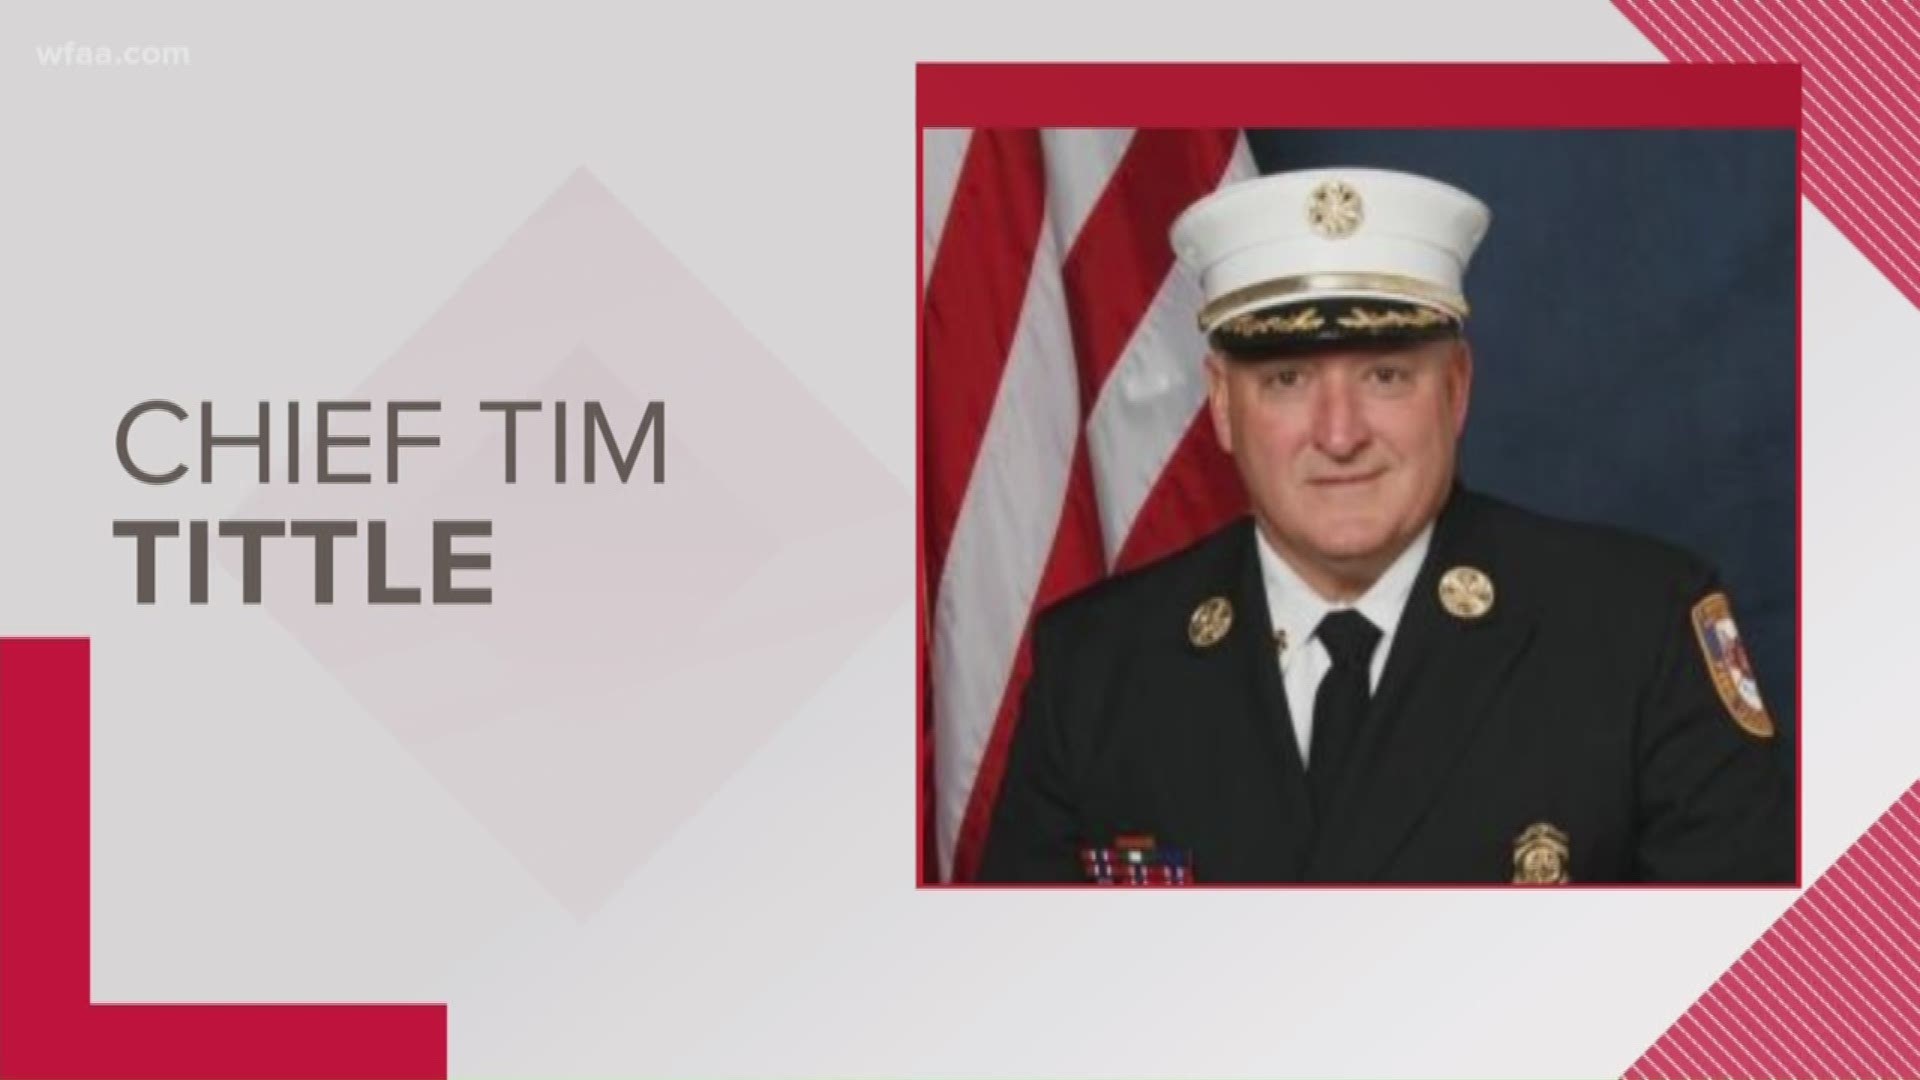 Chief Tim Tittle had worked for the Lewisville Fire Department for more than 40 years.